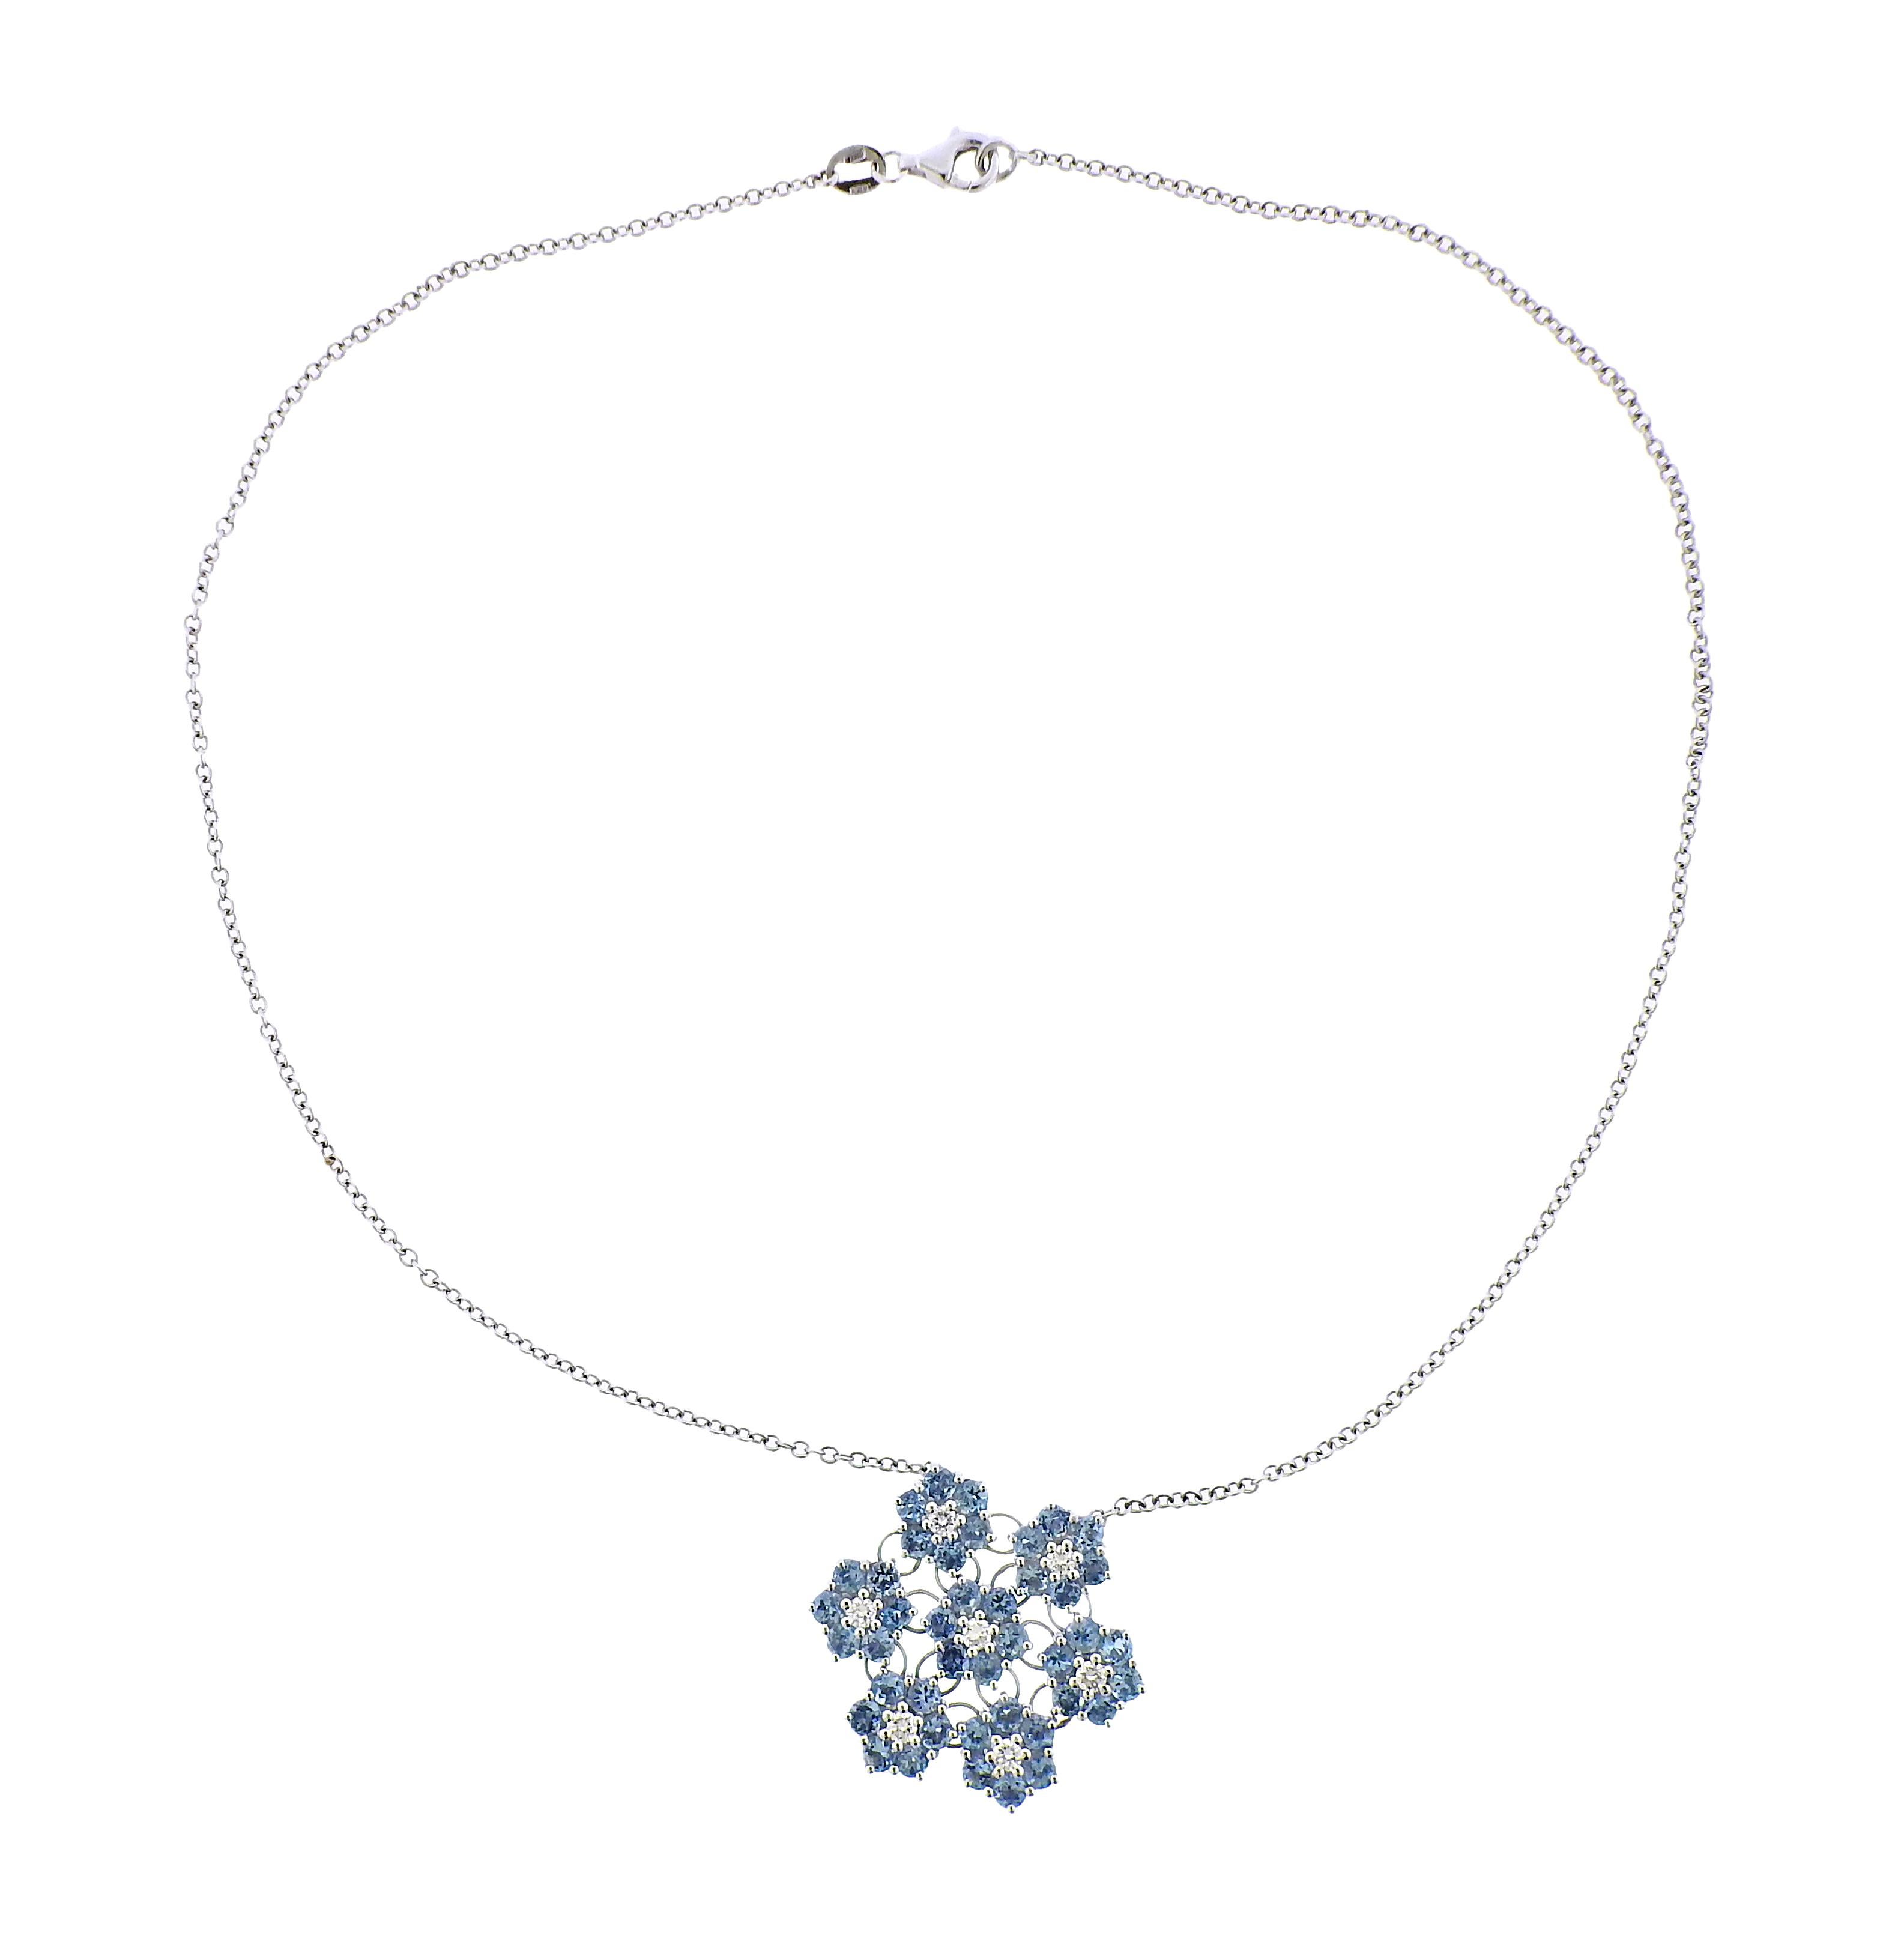 18k white gold pendant necklace, featuring blue topaz and diamond flowers. Diamonds approx. 0.56ctw. Necklace is 16